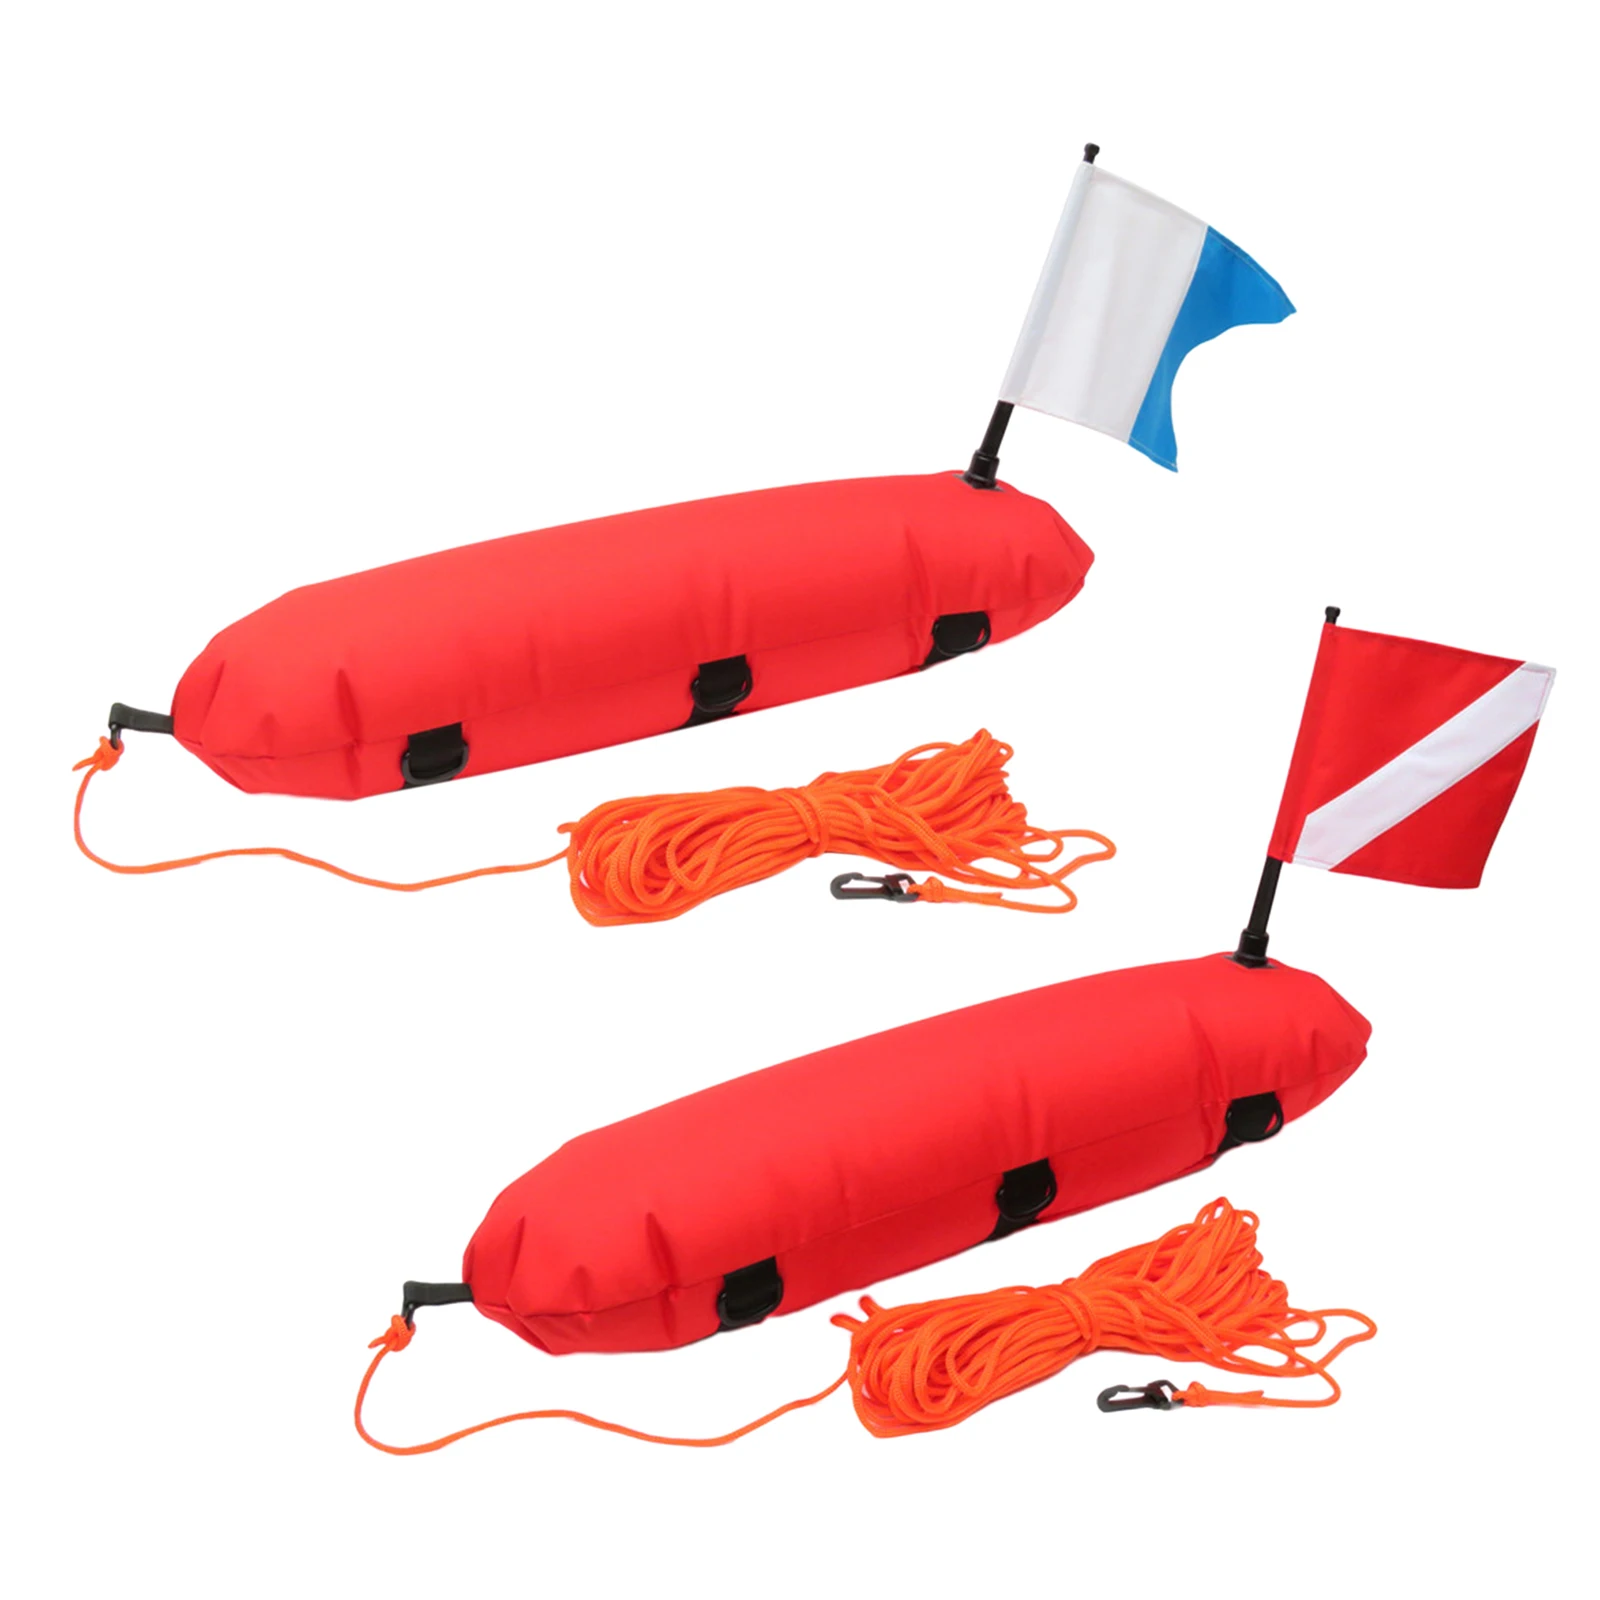 Spearfishing Buoy Safety Inflatable Scuba Diving Surface Signal Marker with Dive Flag and 25m High-Visibility Ropes Diver Gear